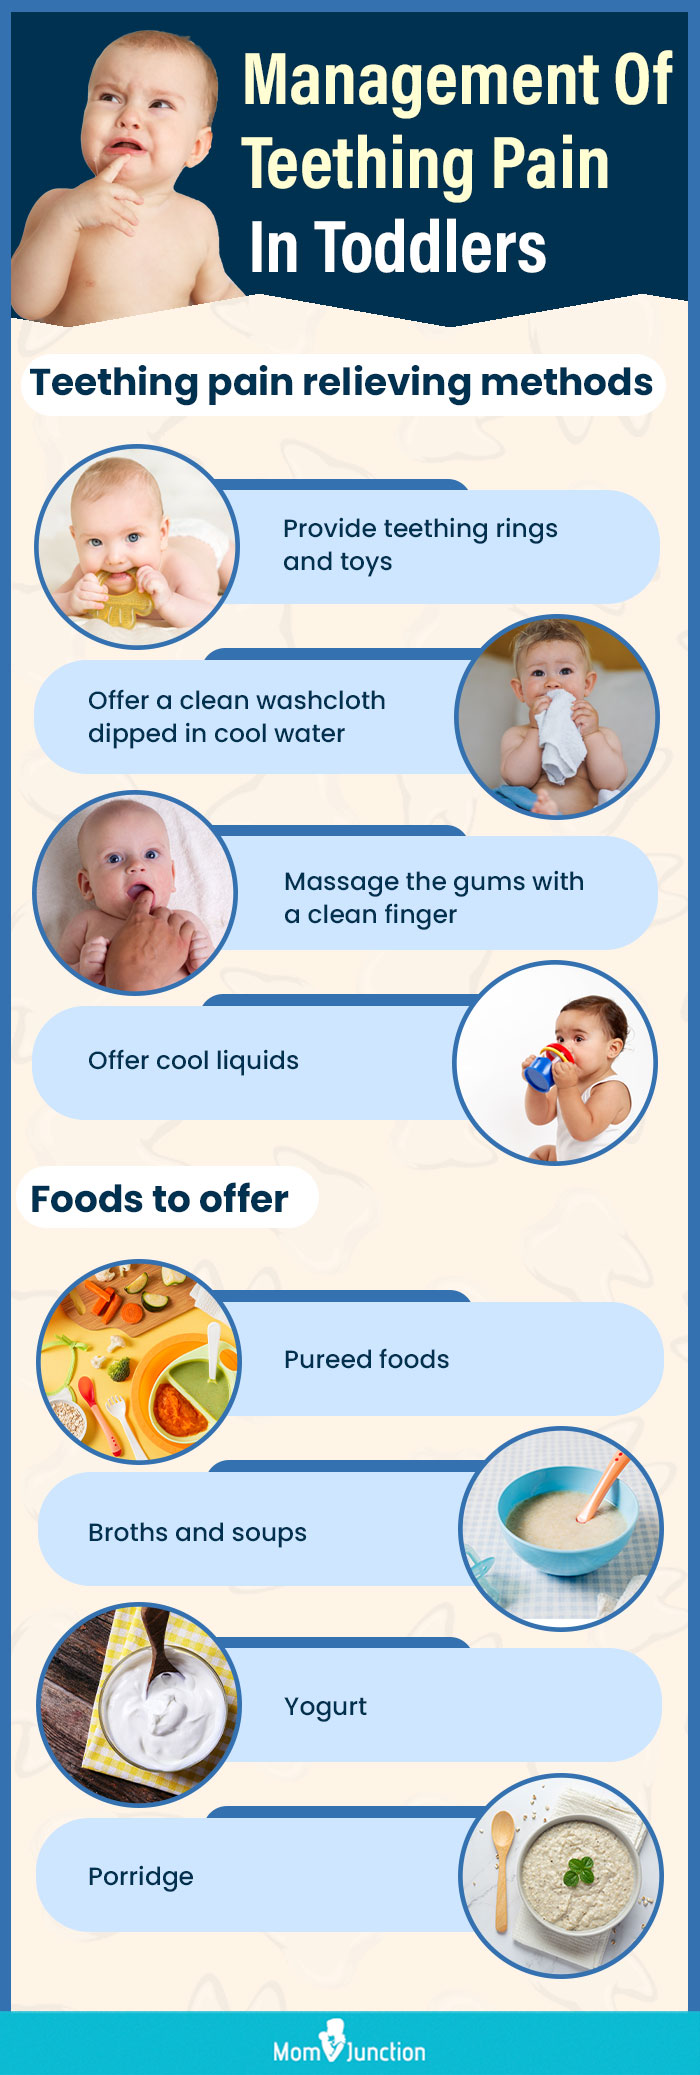 If your baby is always dropping their teether, this can help